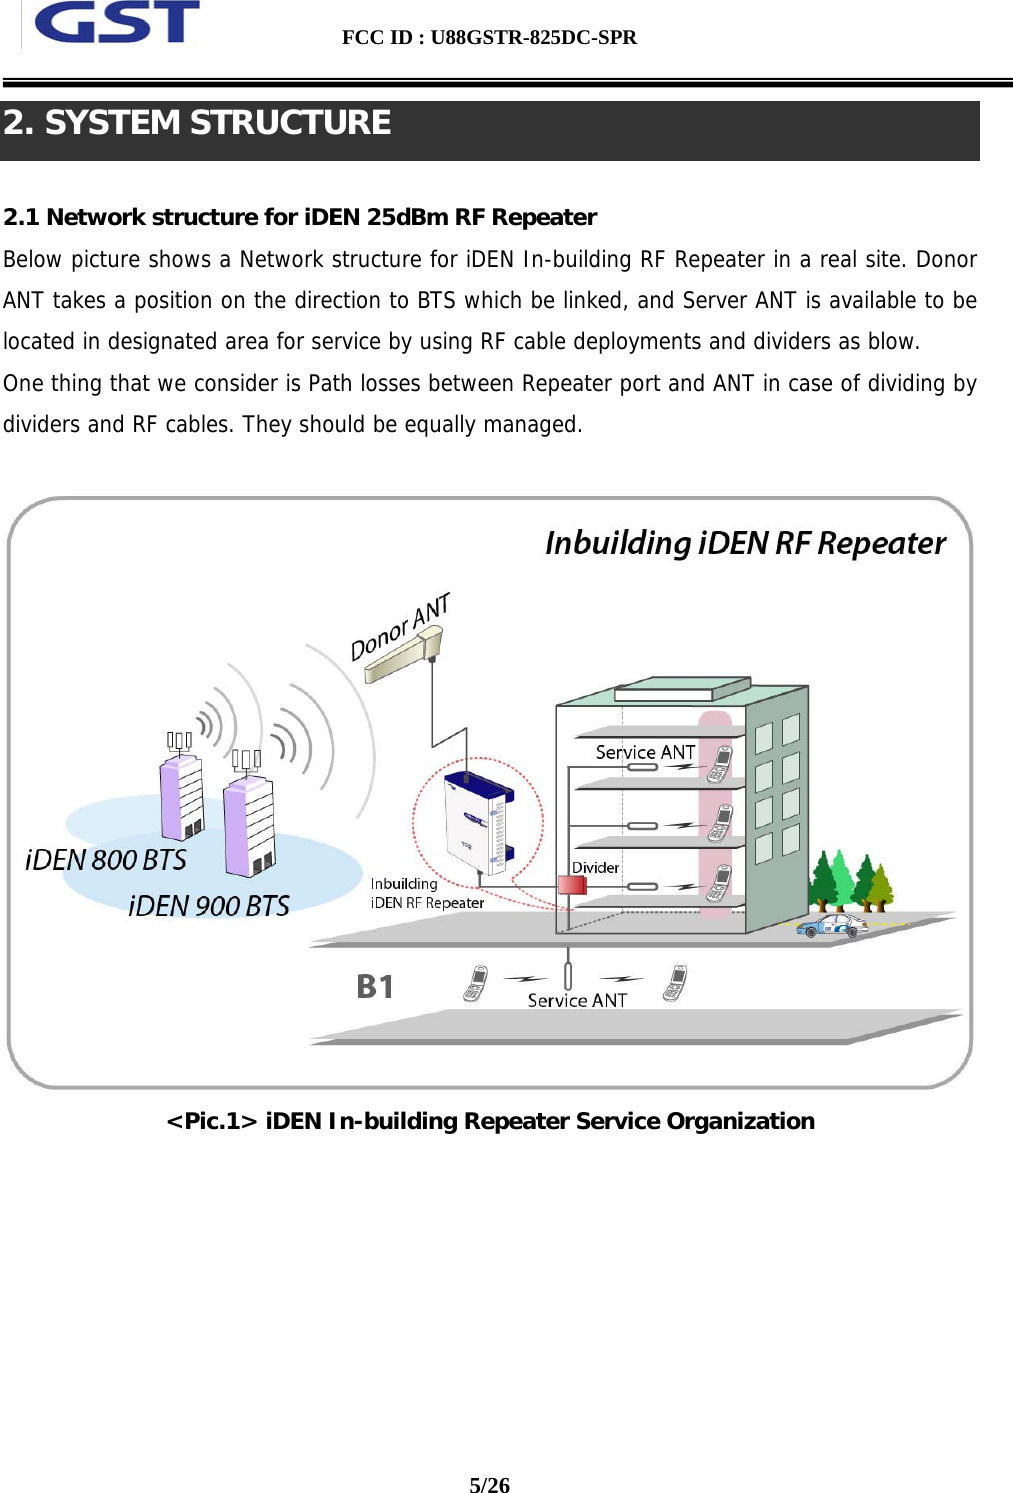  FCC ID : U88GSTR-825DC-SPR                                                                                          5/26  2. SYSTEM STRUCTURE  2.1 Network structure for iDEN 25dBm RF Repeater  Below picture shows a Network structure for iDEN In-building RF Repeater in a real site. Donor ANT takes a position on the direction to BTS which be linked, and Server ANT is available to be located in designated area for service by using RF cable deployments and dividers as blow.  One thing that we consider is Path losses between Repeater port and ANT in case of dividing by dividers and RF cables. They should be equally managed.   &lt;Pic.1&gt; iDEN In-building Repeater Service Organization 